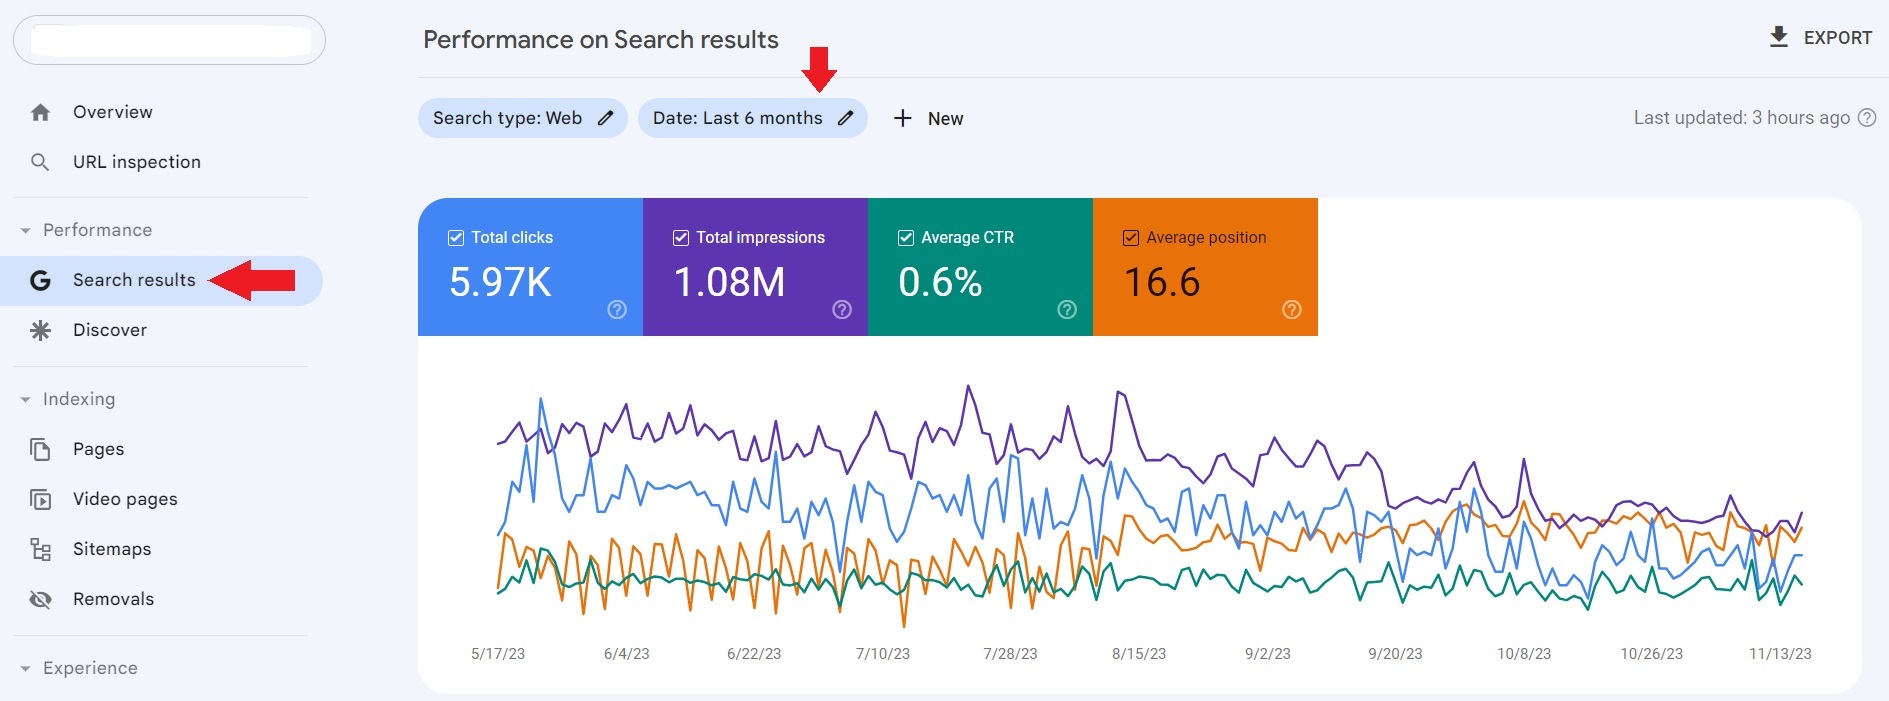 Extport data from Google search console to understand the reason of site ranking drop.